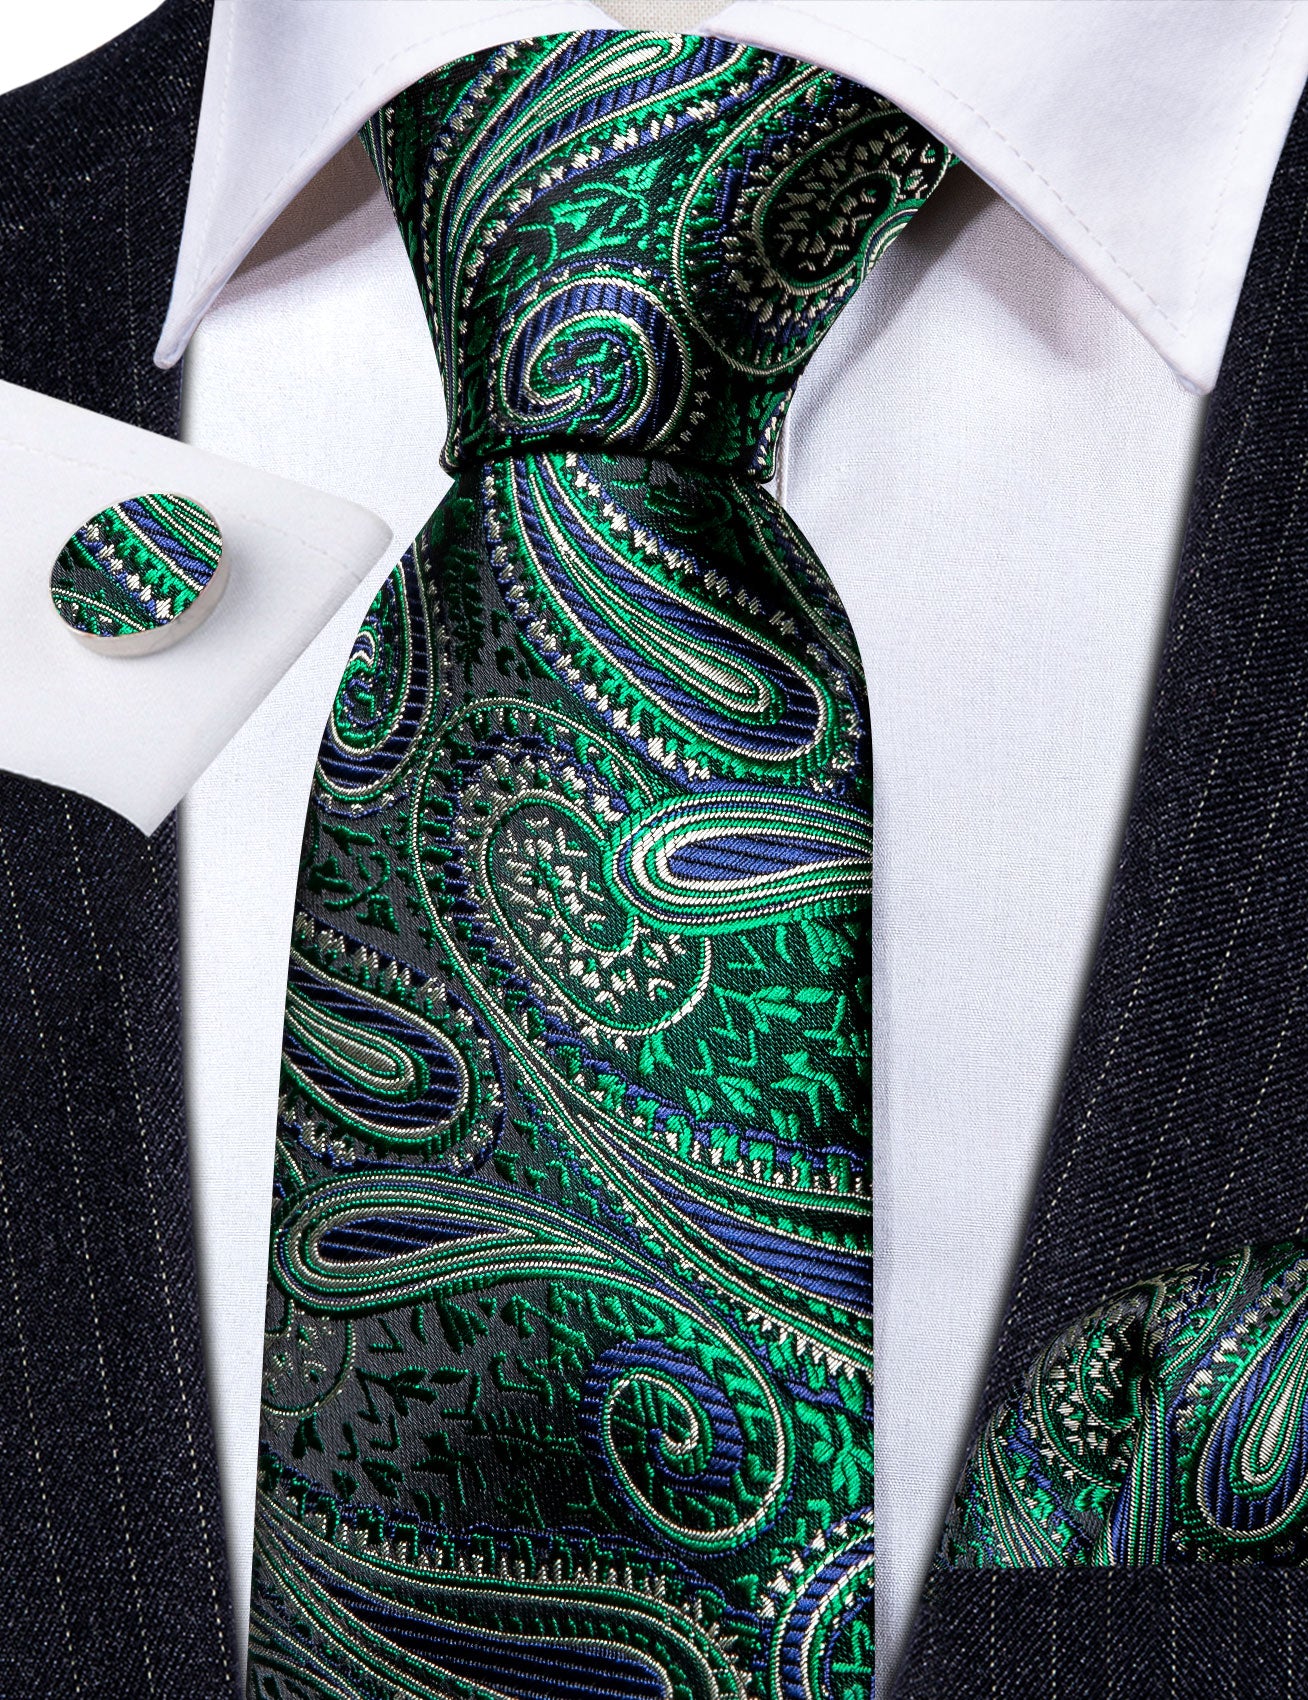 Barry.wang Green Tie Paisley Silk Men's Tie Pocket Square Cufflinks Set with Brooches